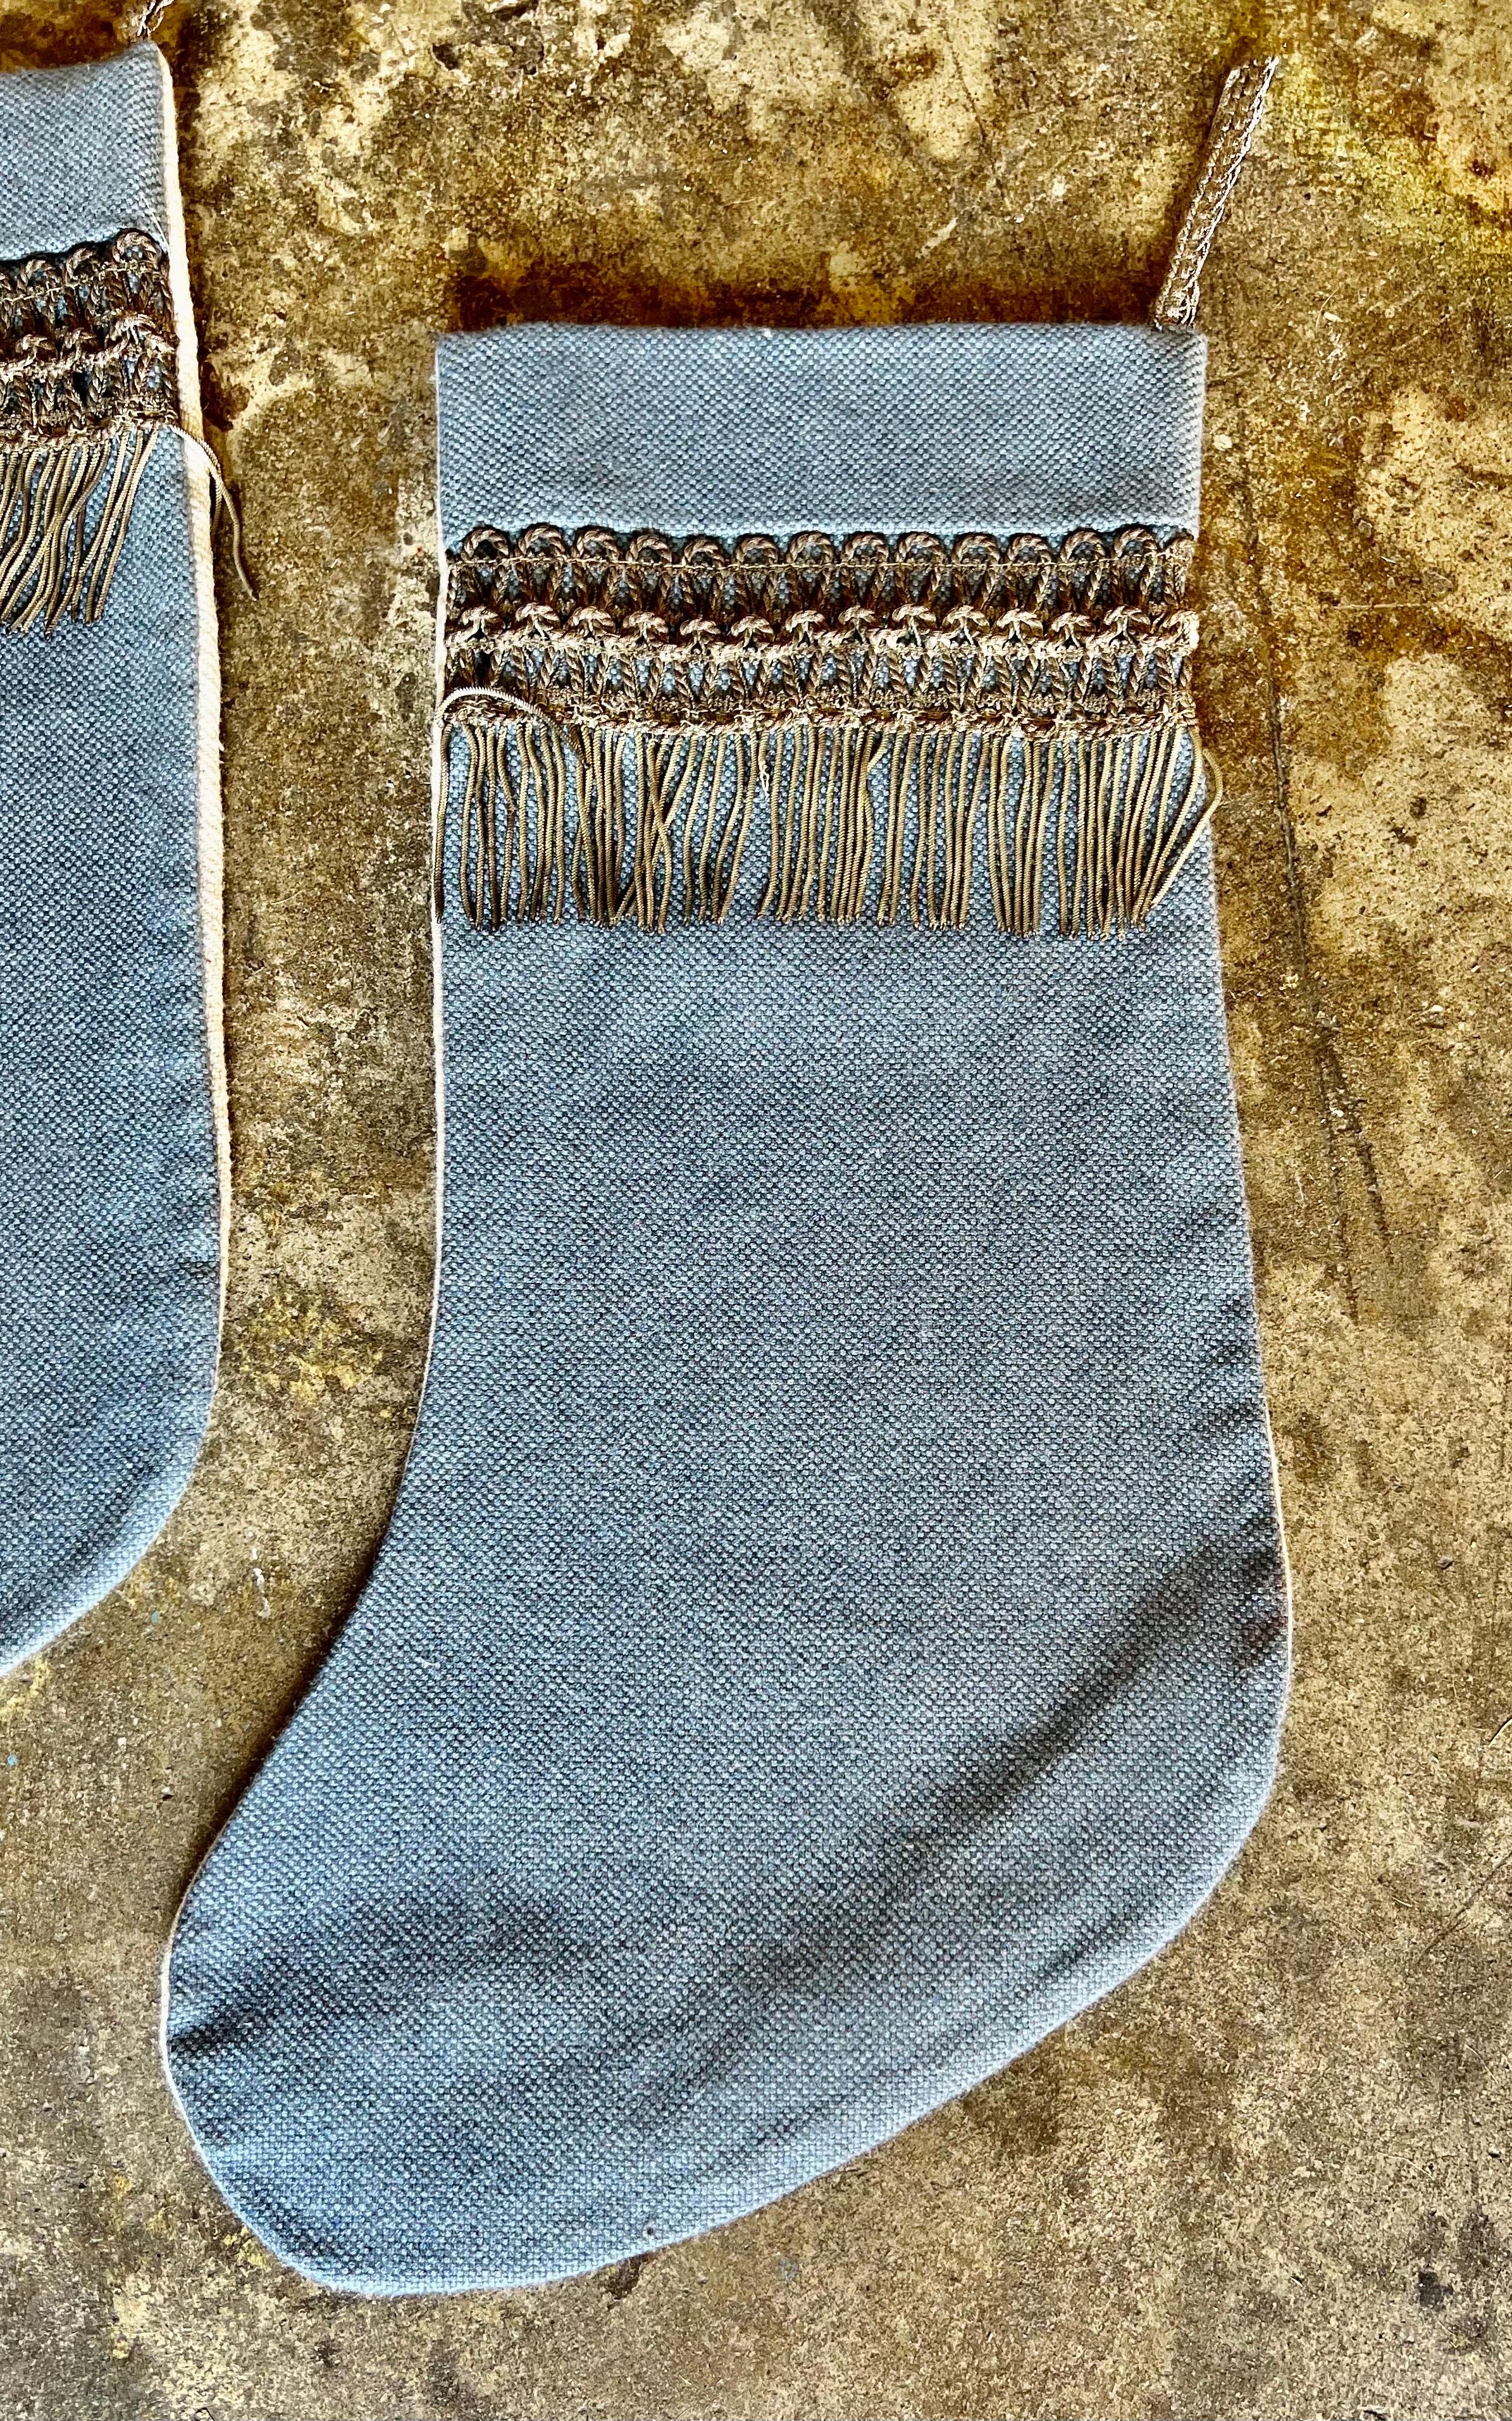 These three custom-made Christmas stockings featuring blue silk linen on the front, antique silver metallic 19th-century trims, and white linen backs is a sophisticated and timeless holiday accessory, blending rich textures and historical elements